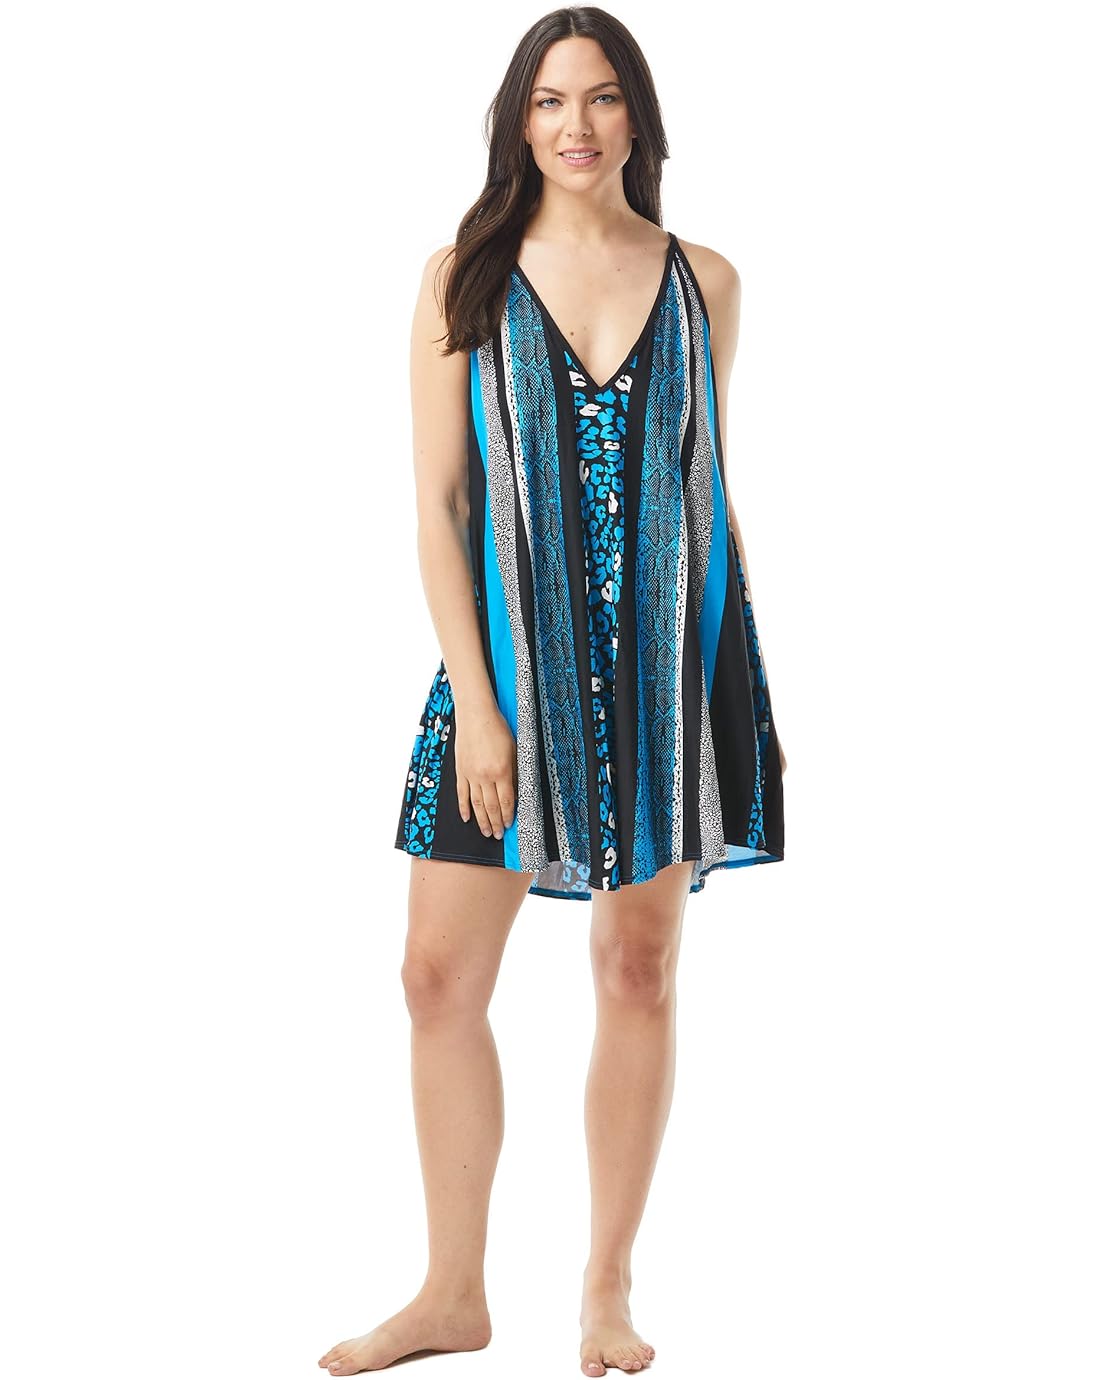 COCO REEF Python Femme Cover-Up Dress